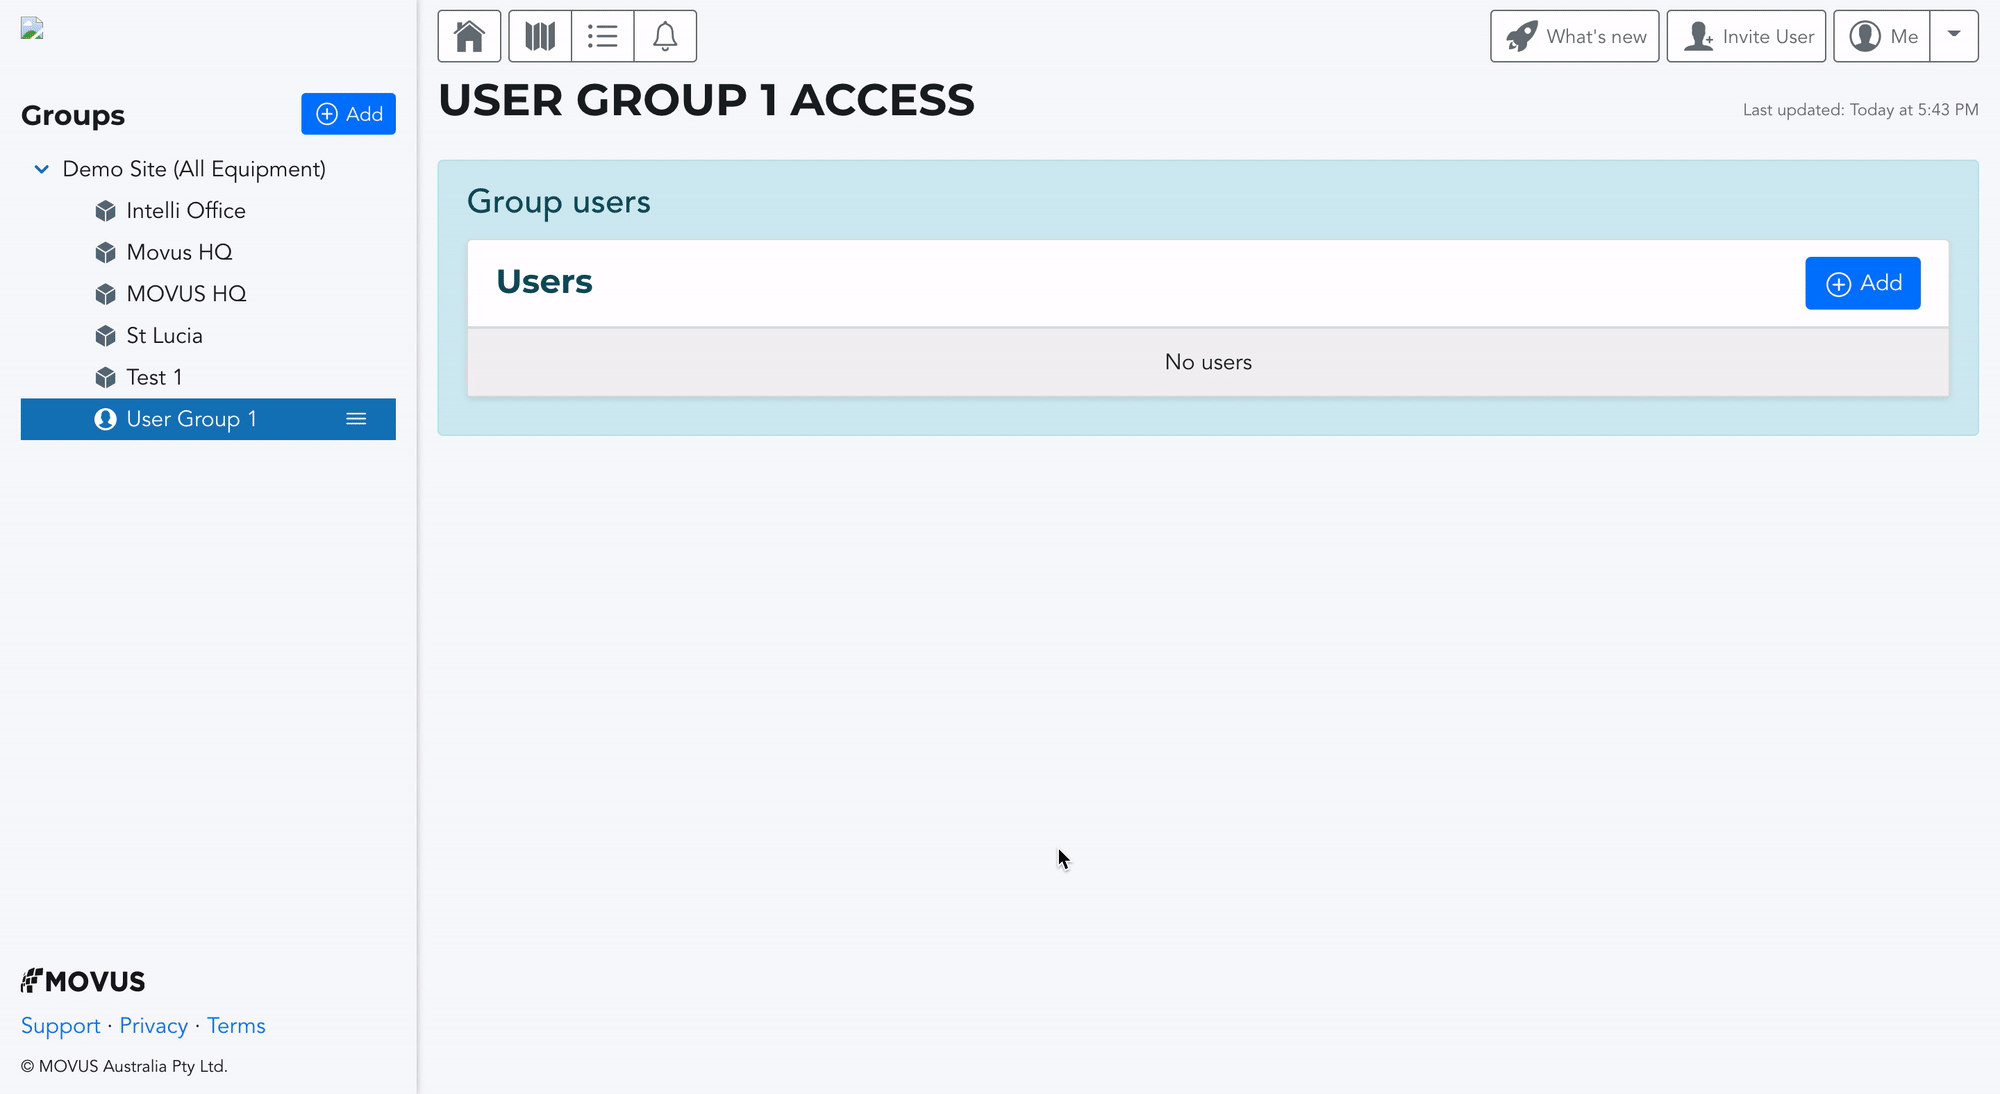 Adding Users to User Group